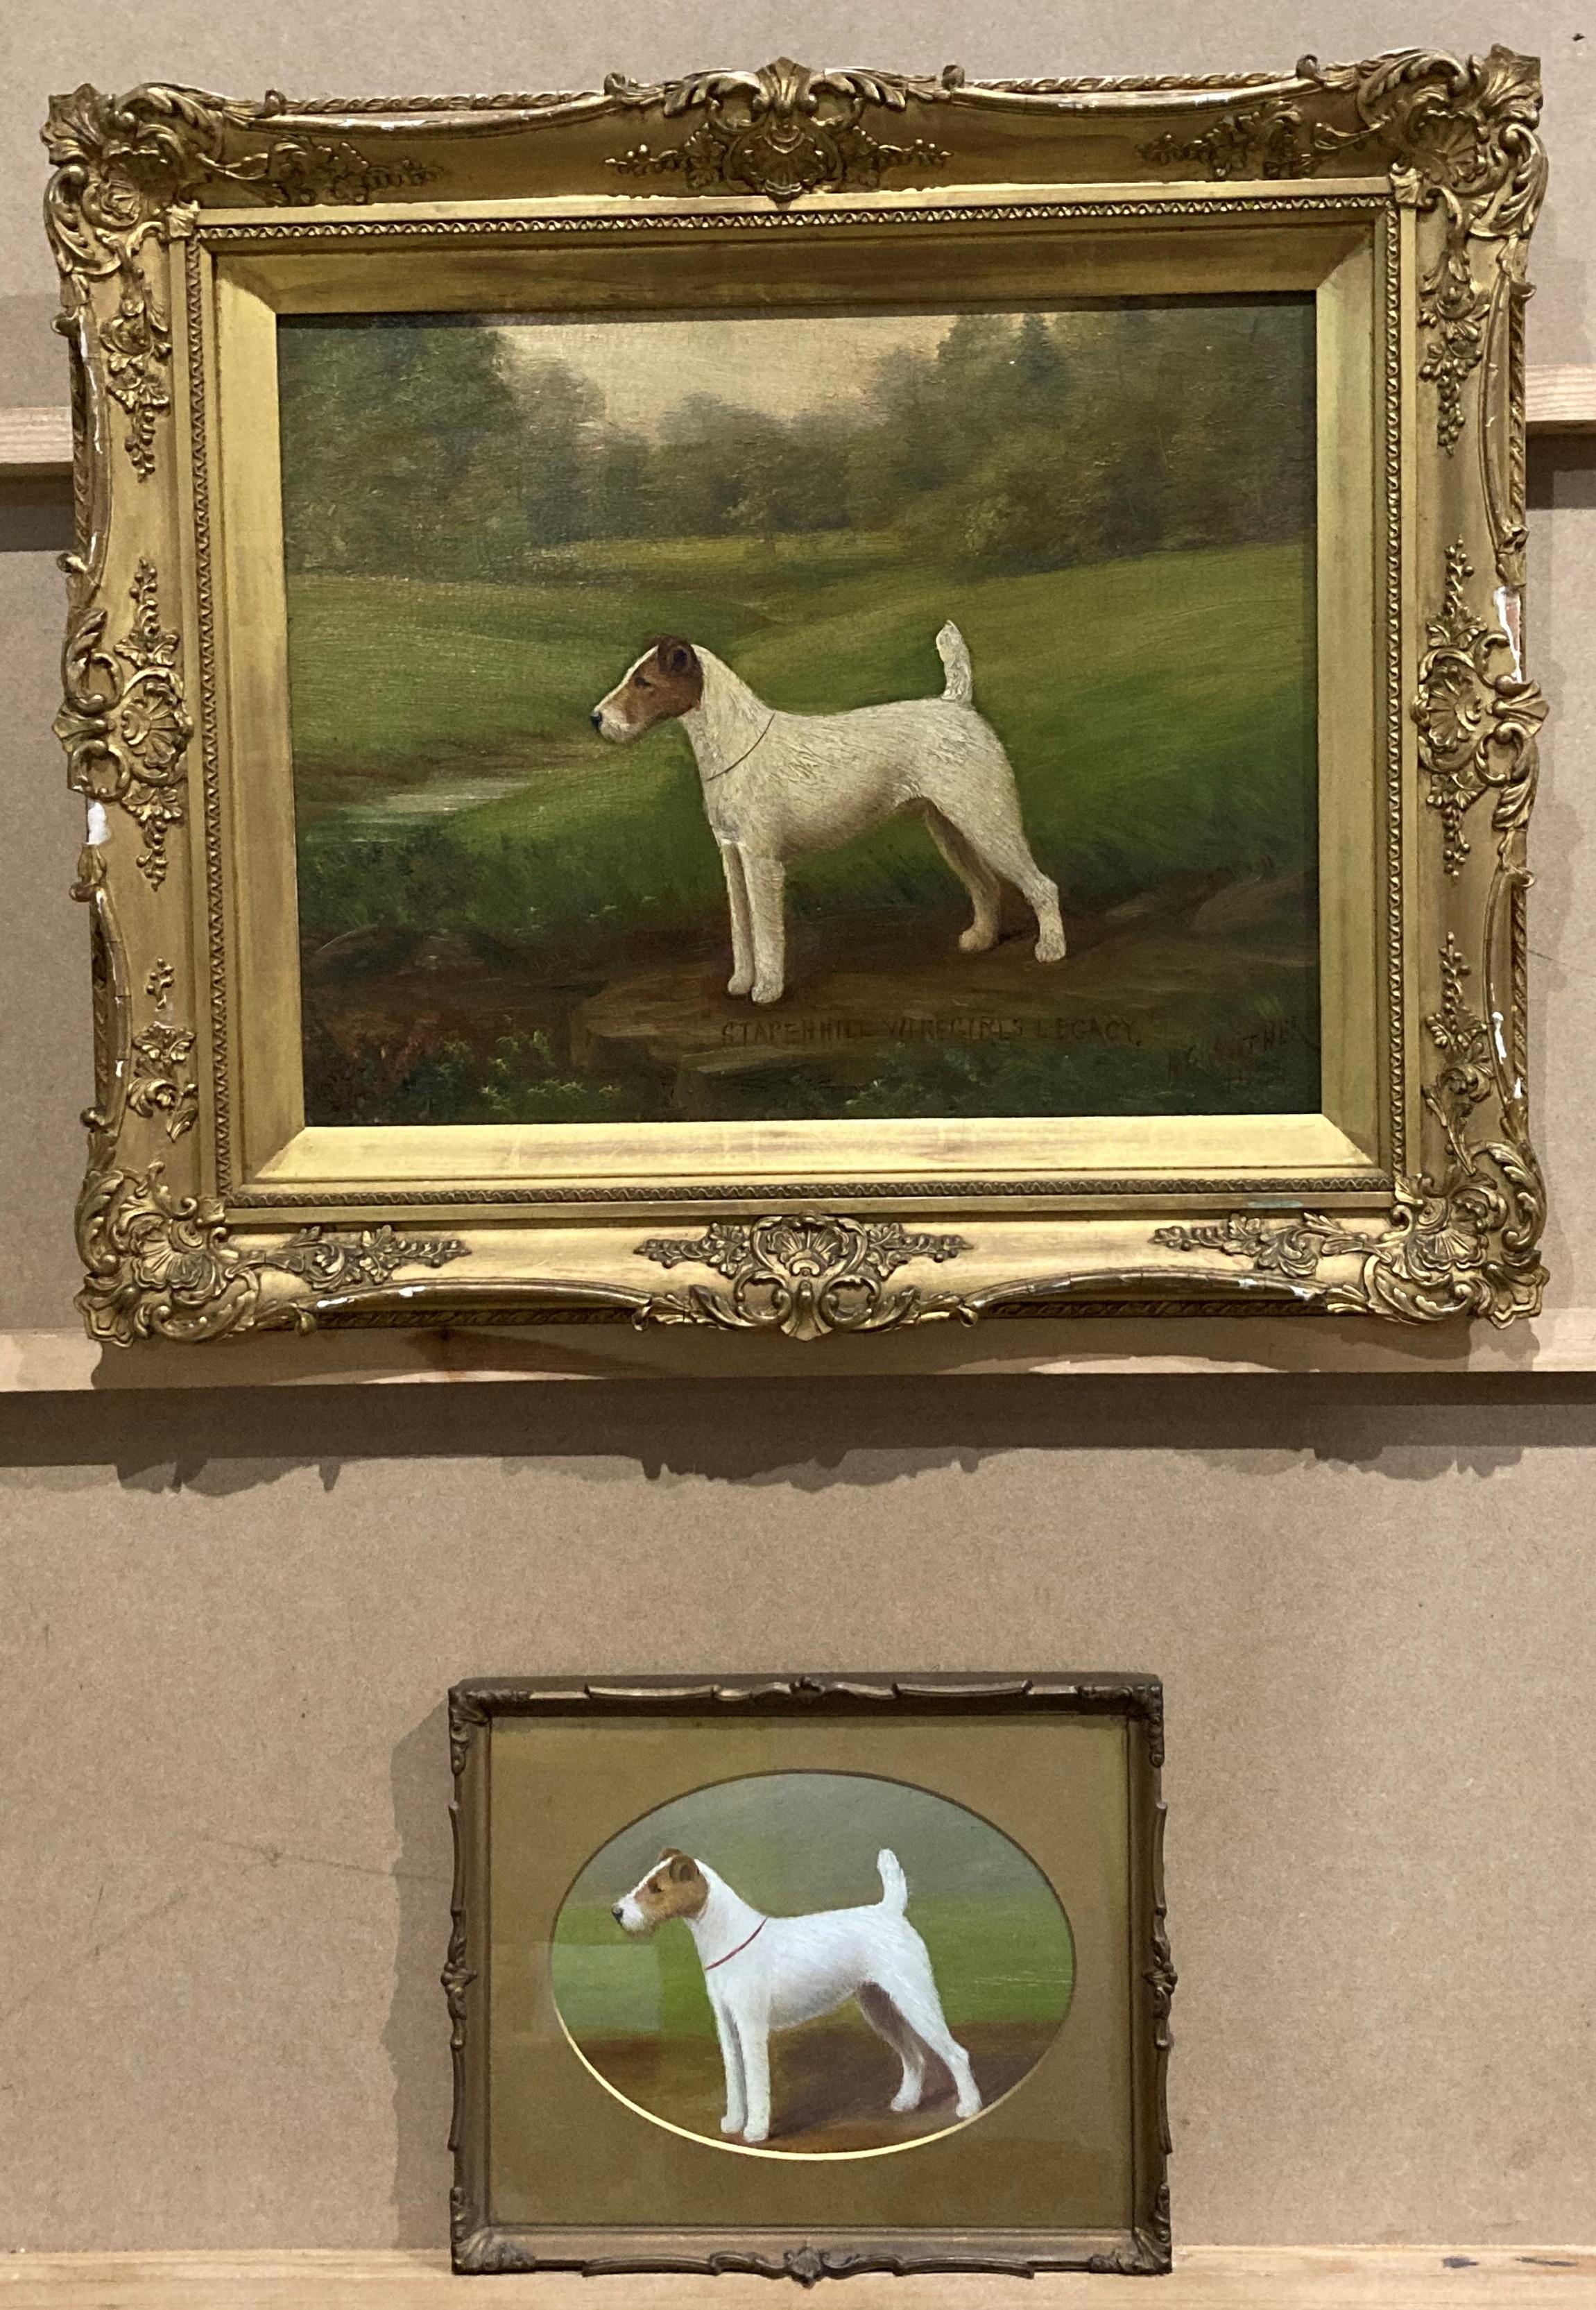 H Crowther 1923, 'Stapenhill Wiregirls Legacy', study of a fox terrier, oil on canvas,